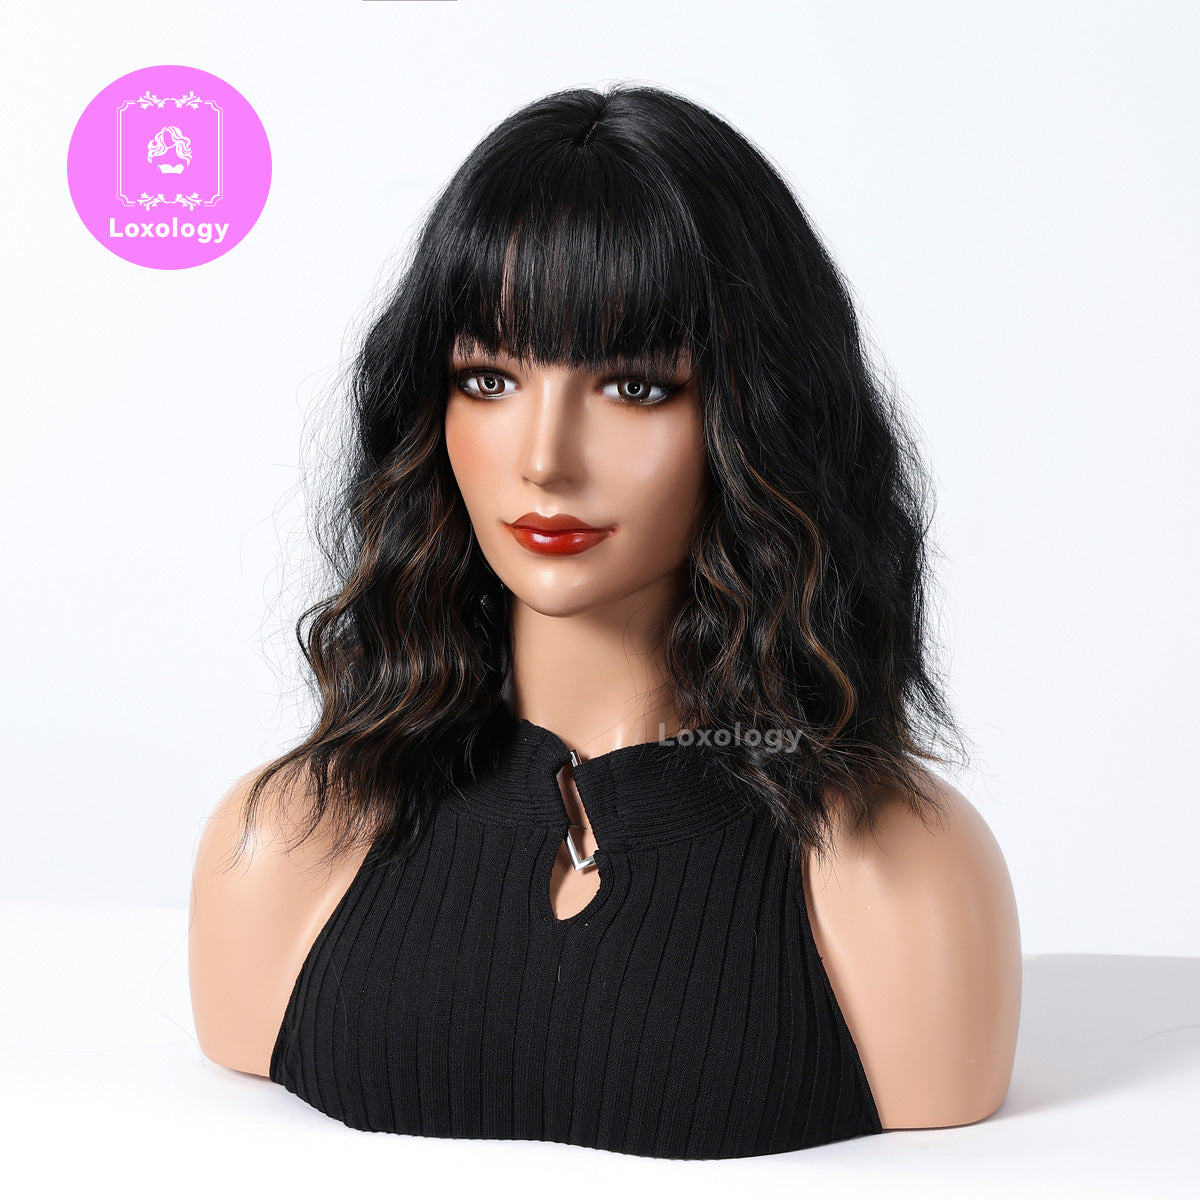 【TBeatrix】Loxology | 14 inches Short Natural wave Short Fashion Wigs Synthetic Wigs